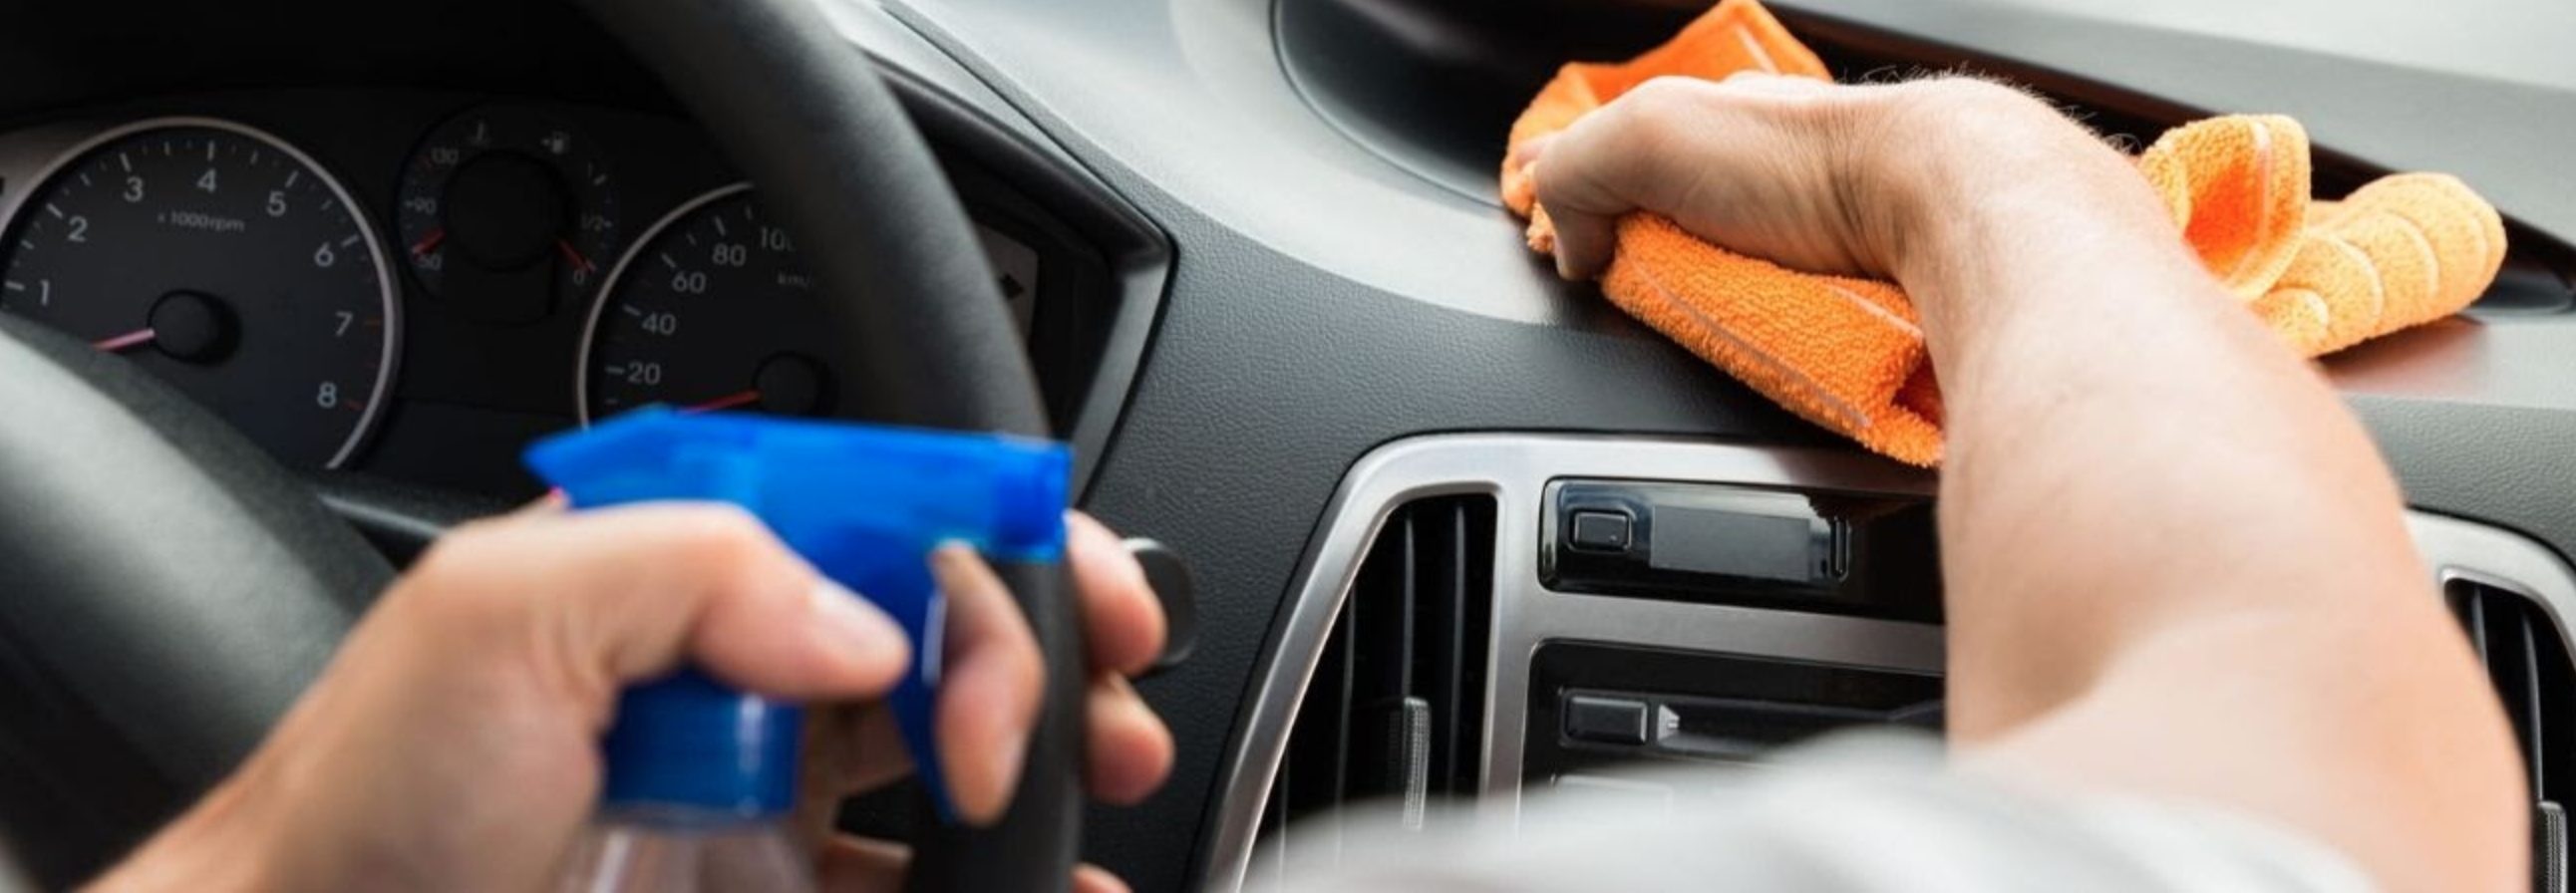 Car Sanitation: 5 Tips to Keep You Safe and Healthy